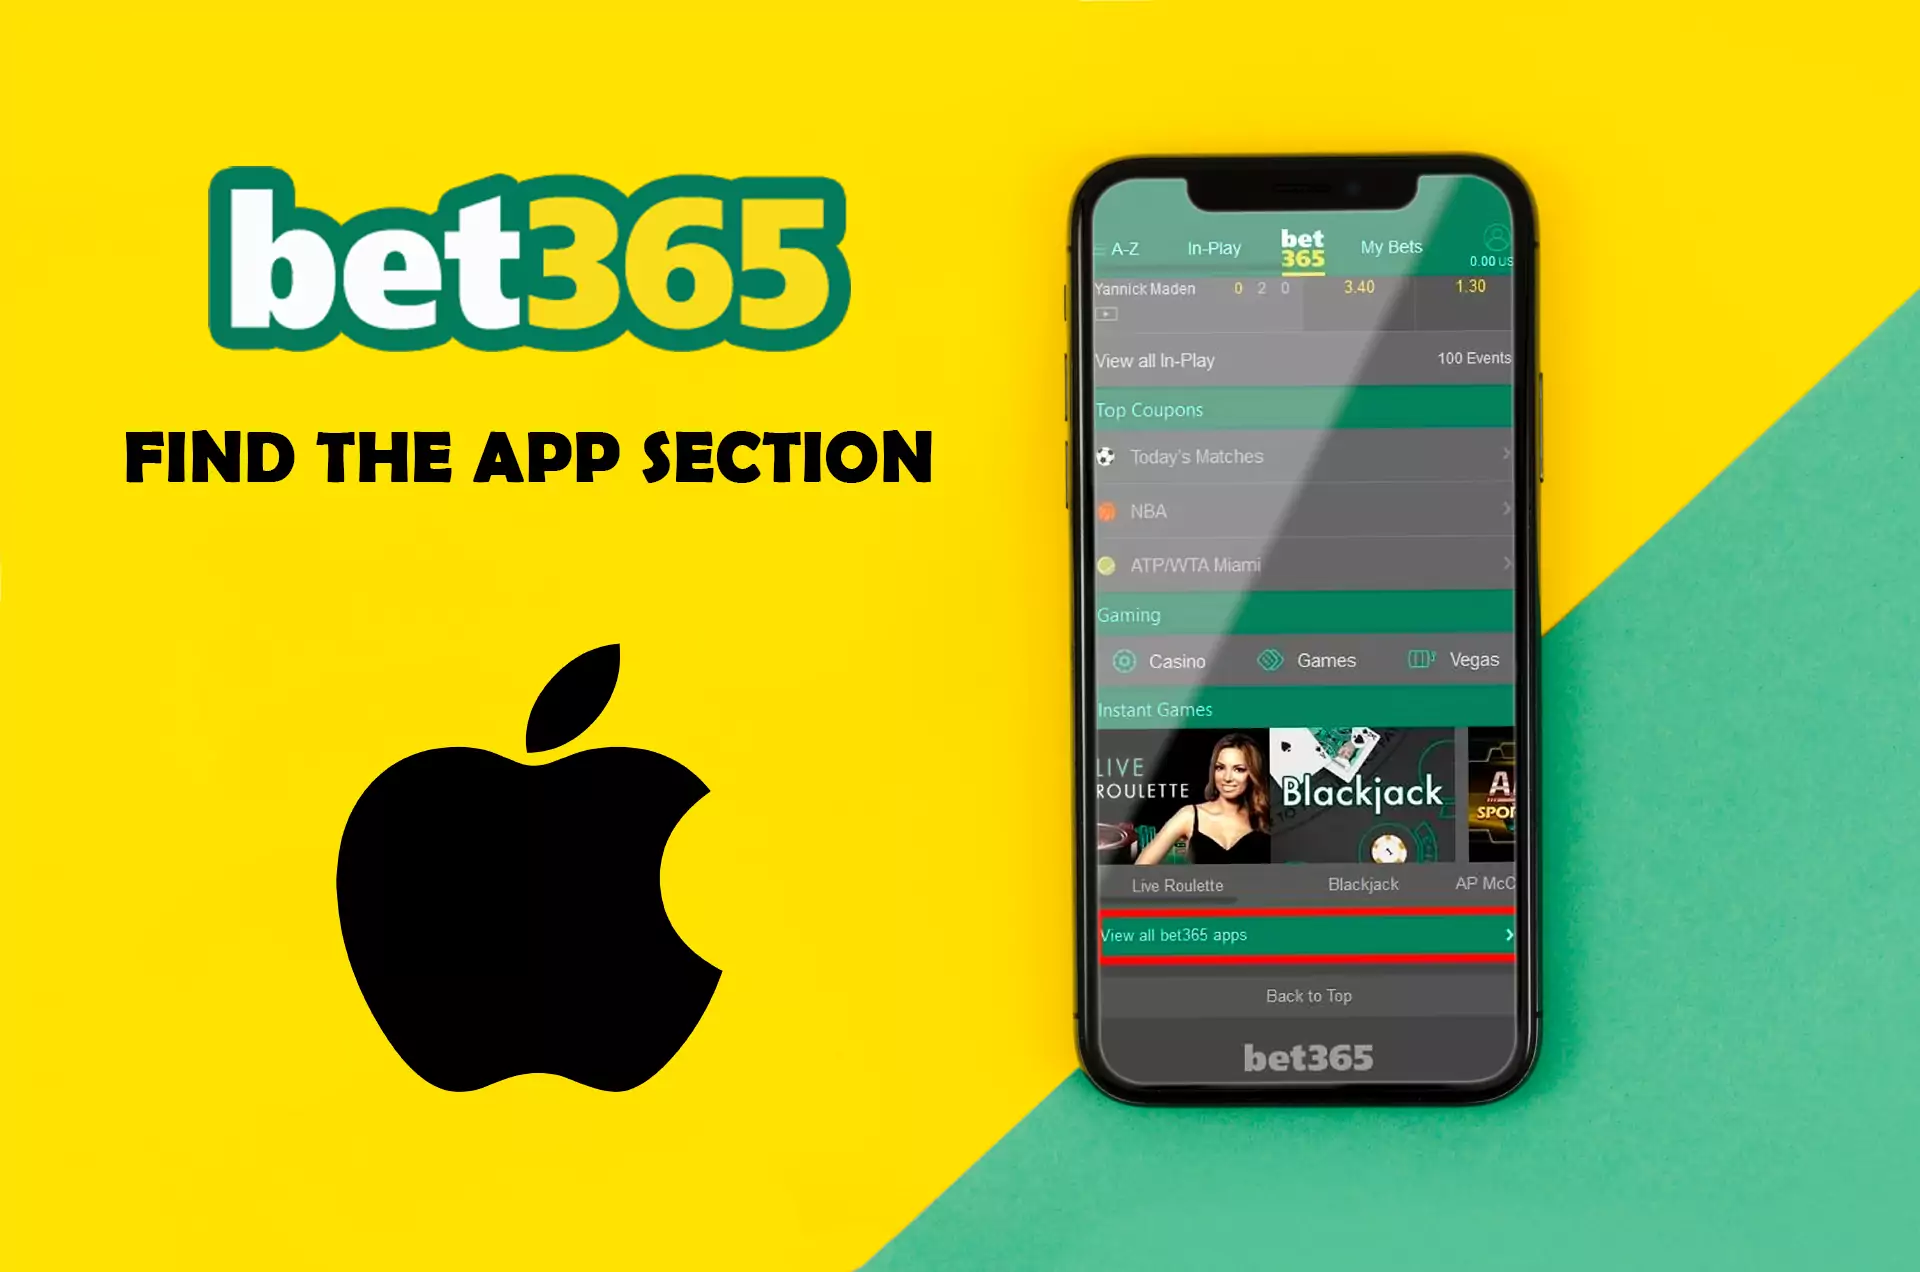 Find the list of the available Bet365 apps.